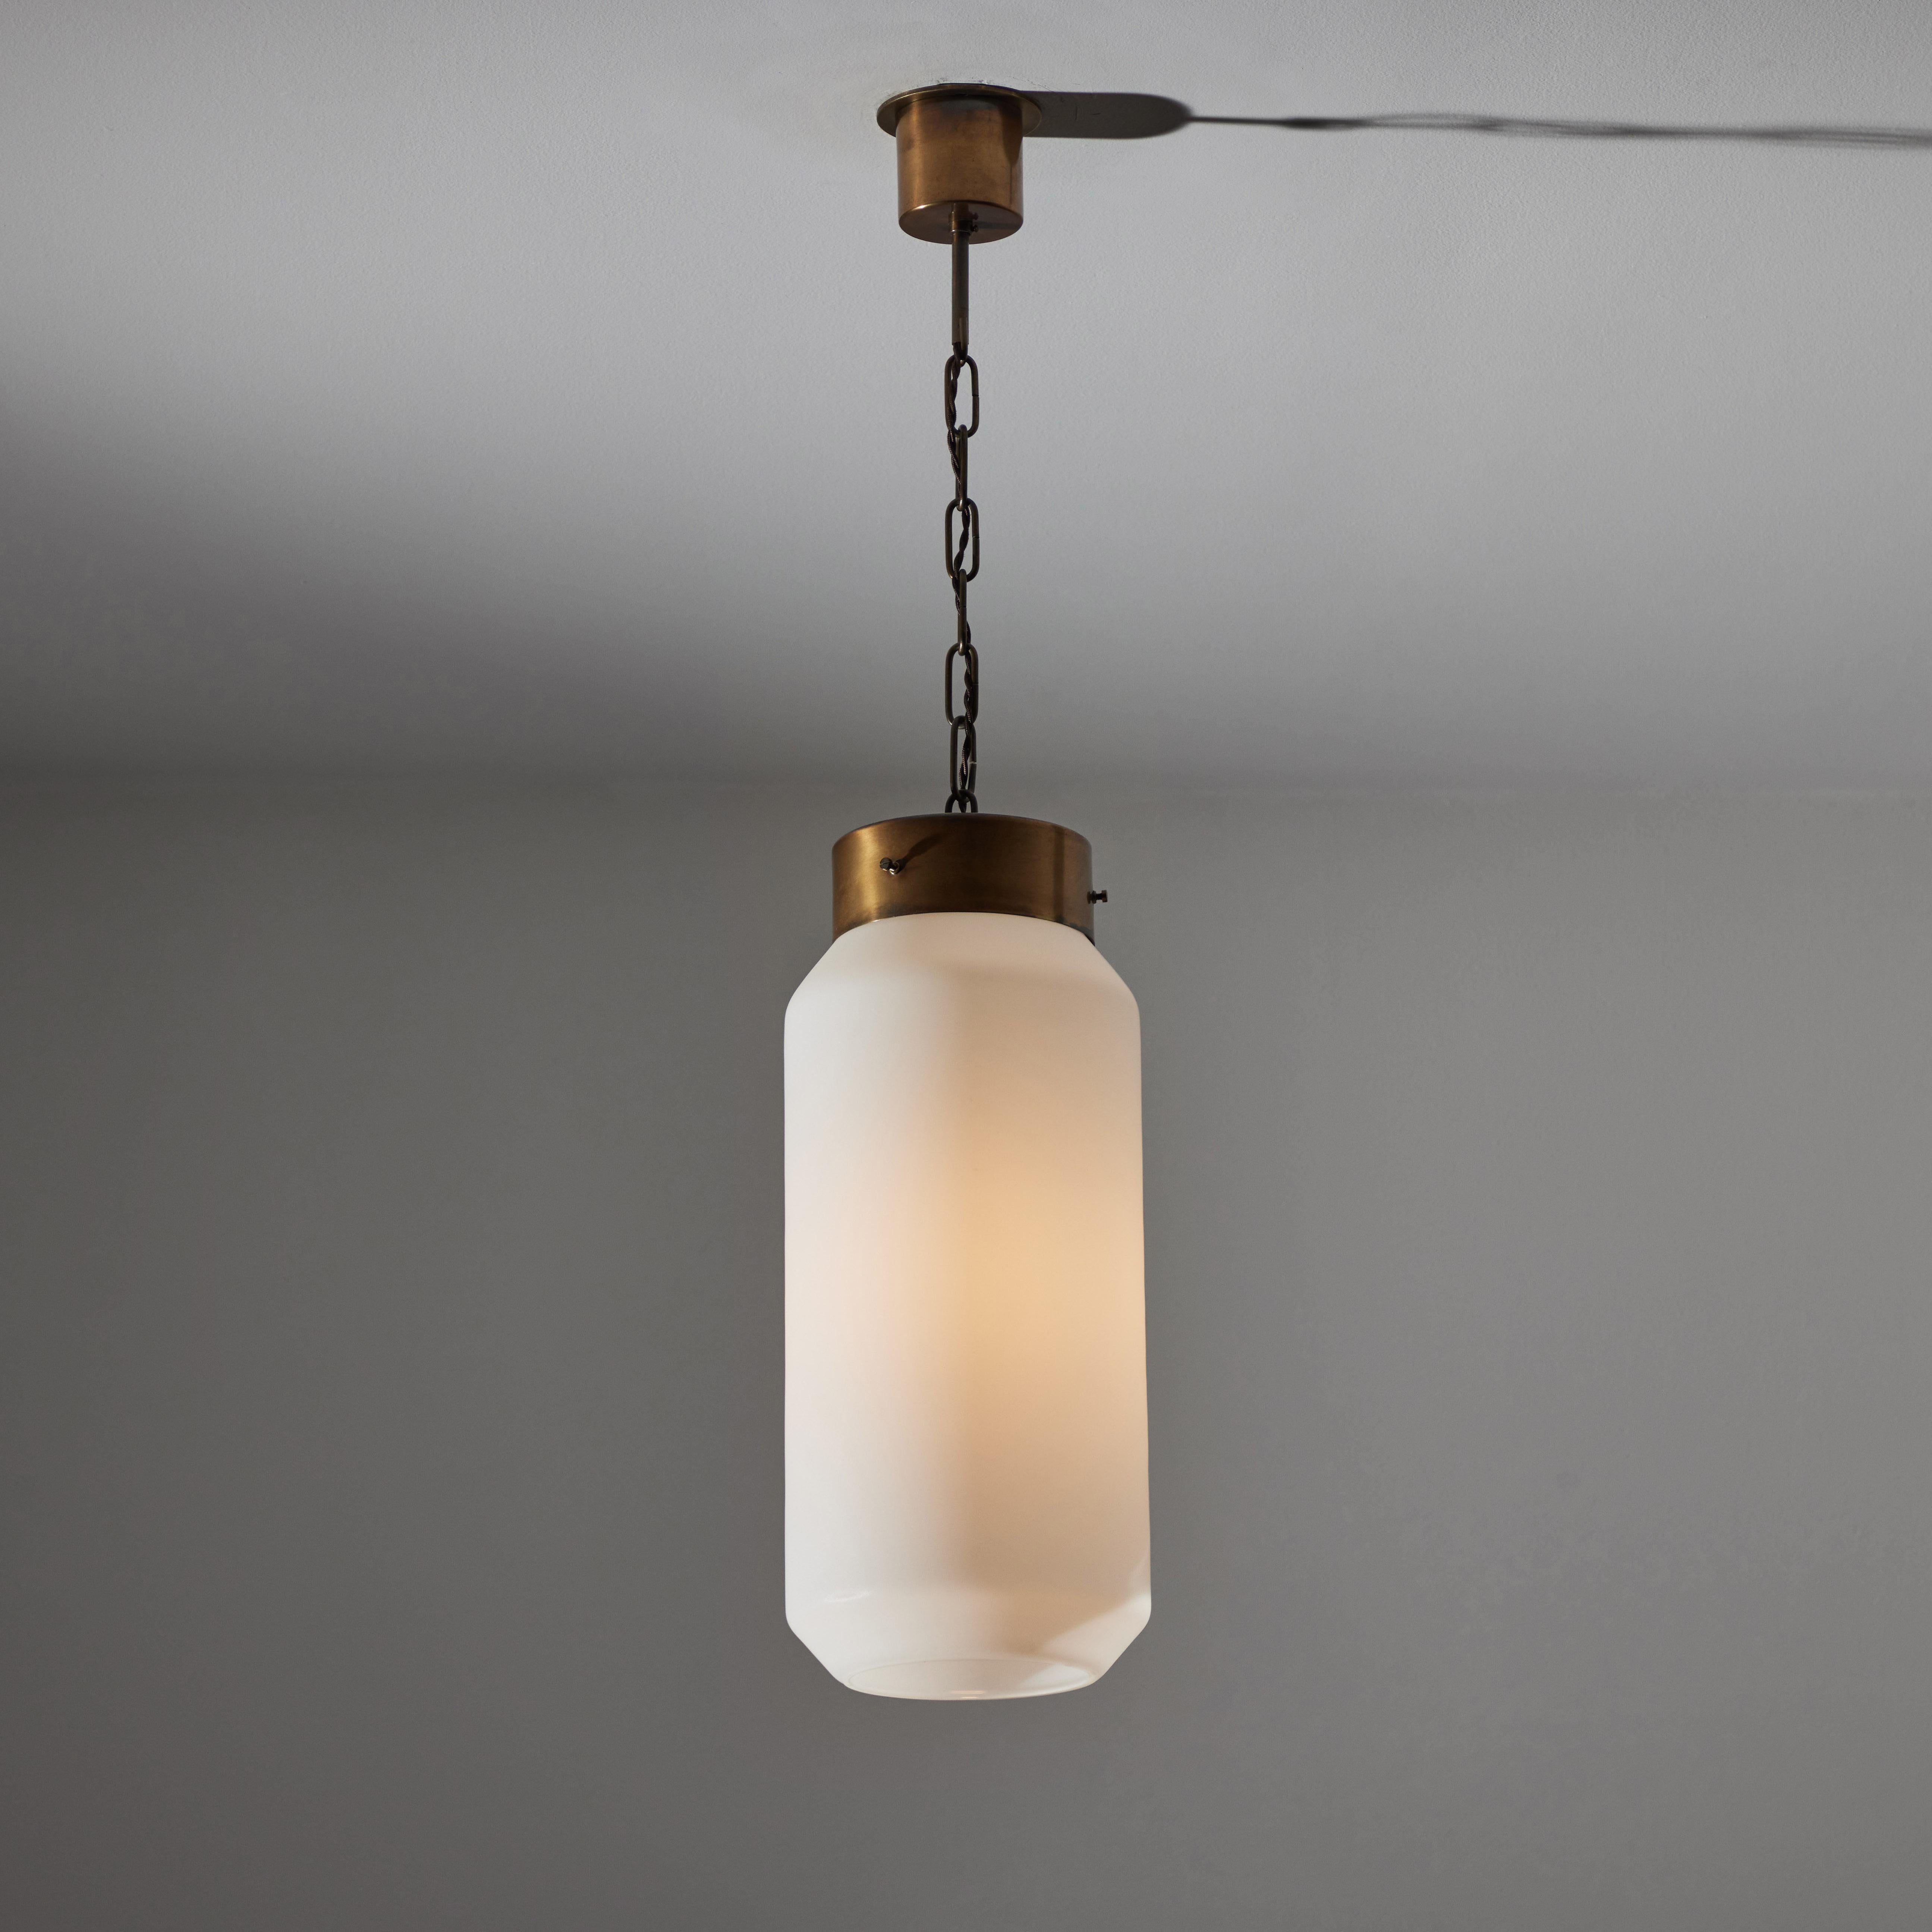 Mid-20th Century Single Ceiling Light by Caccia Dominioni for Azucena For Sale